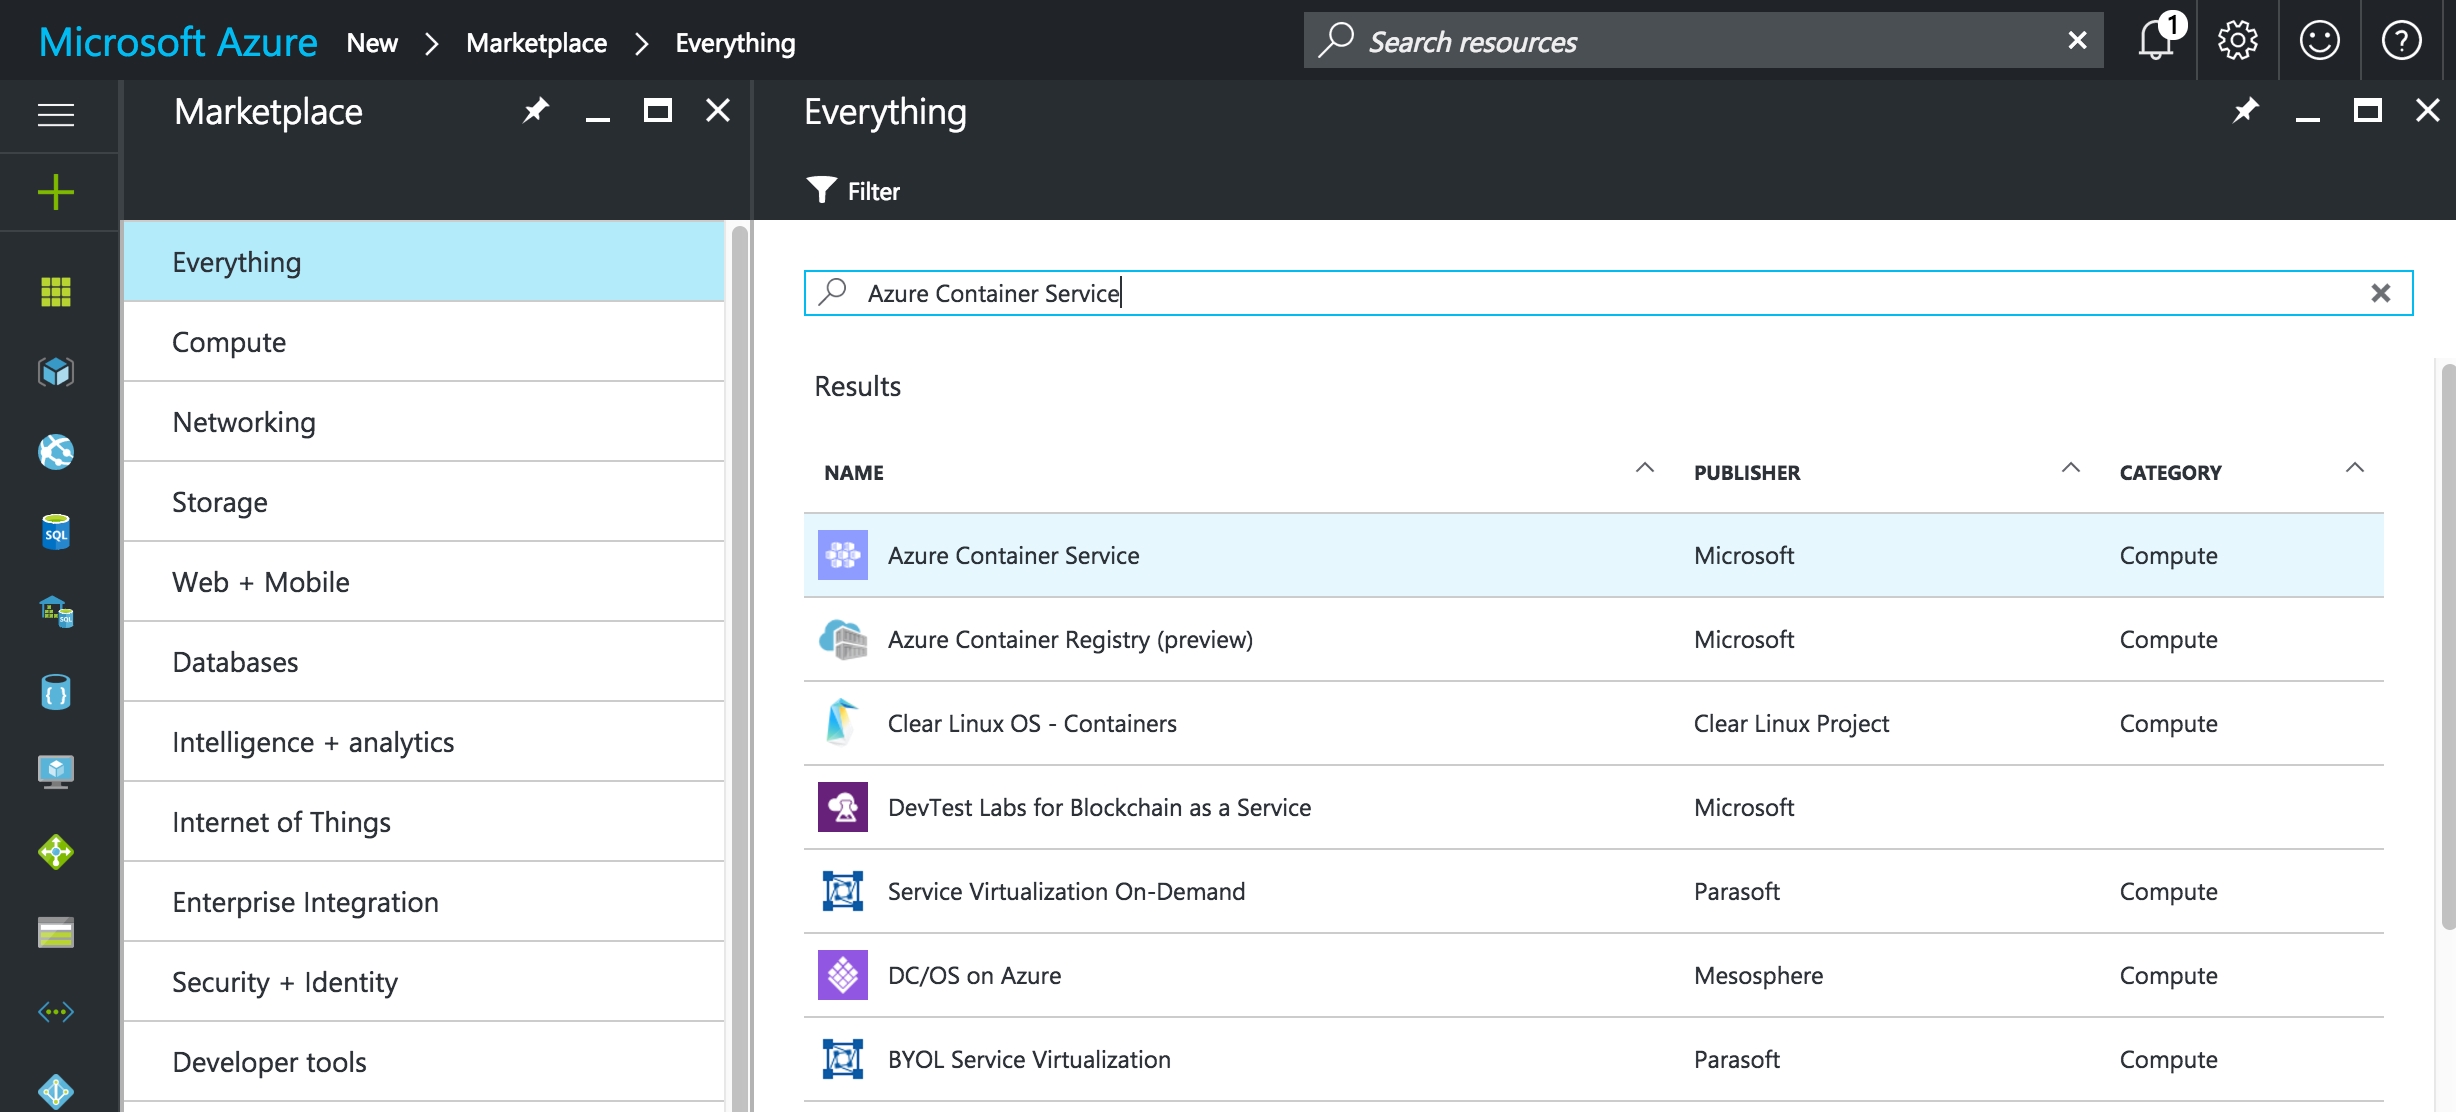 Troubleshooting - The Microsoft Azure Container Service